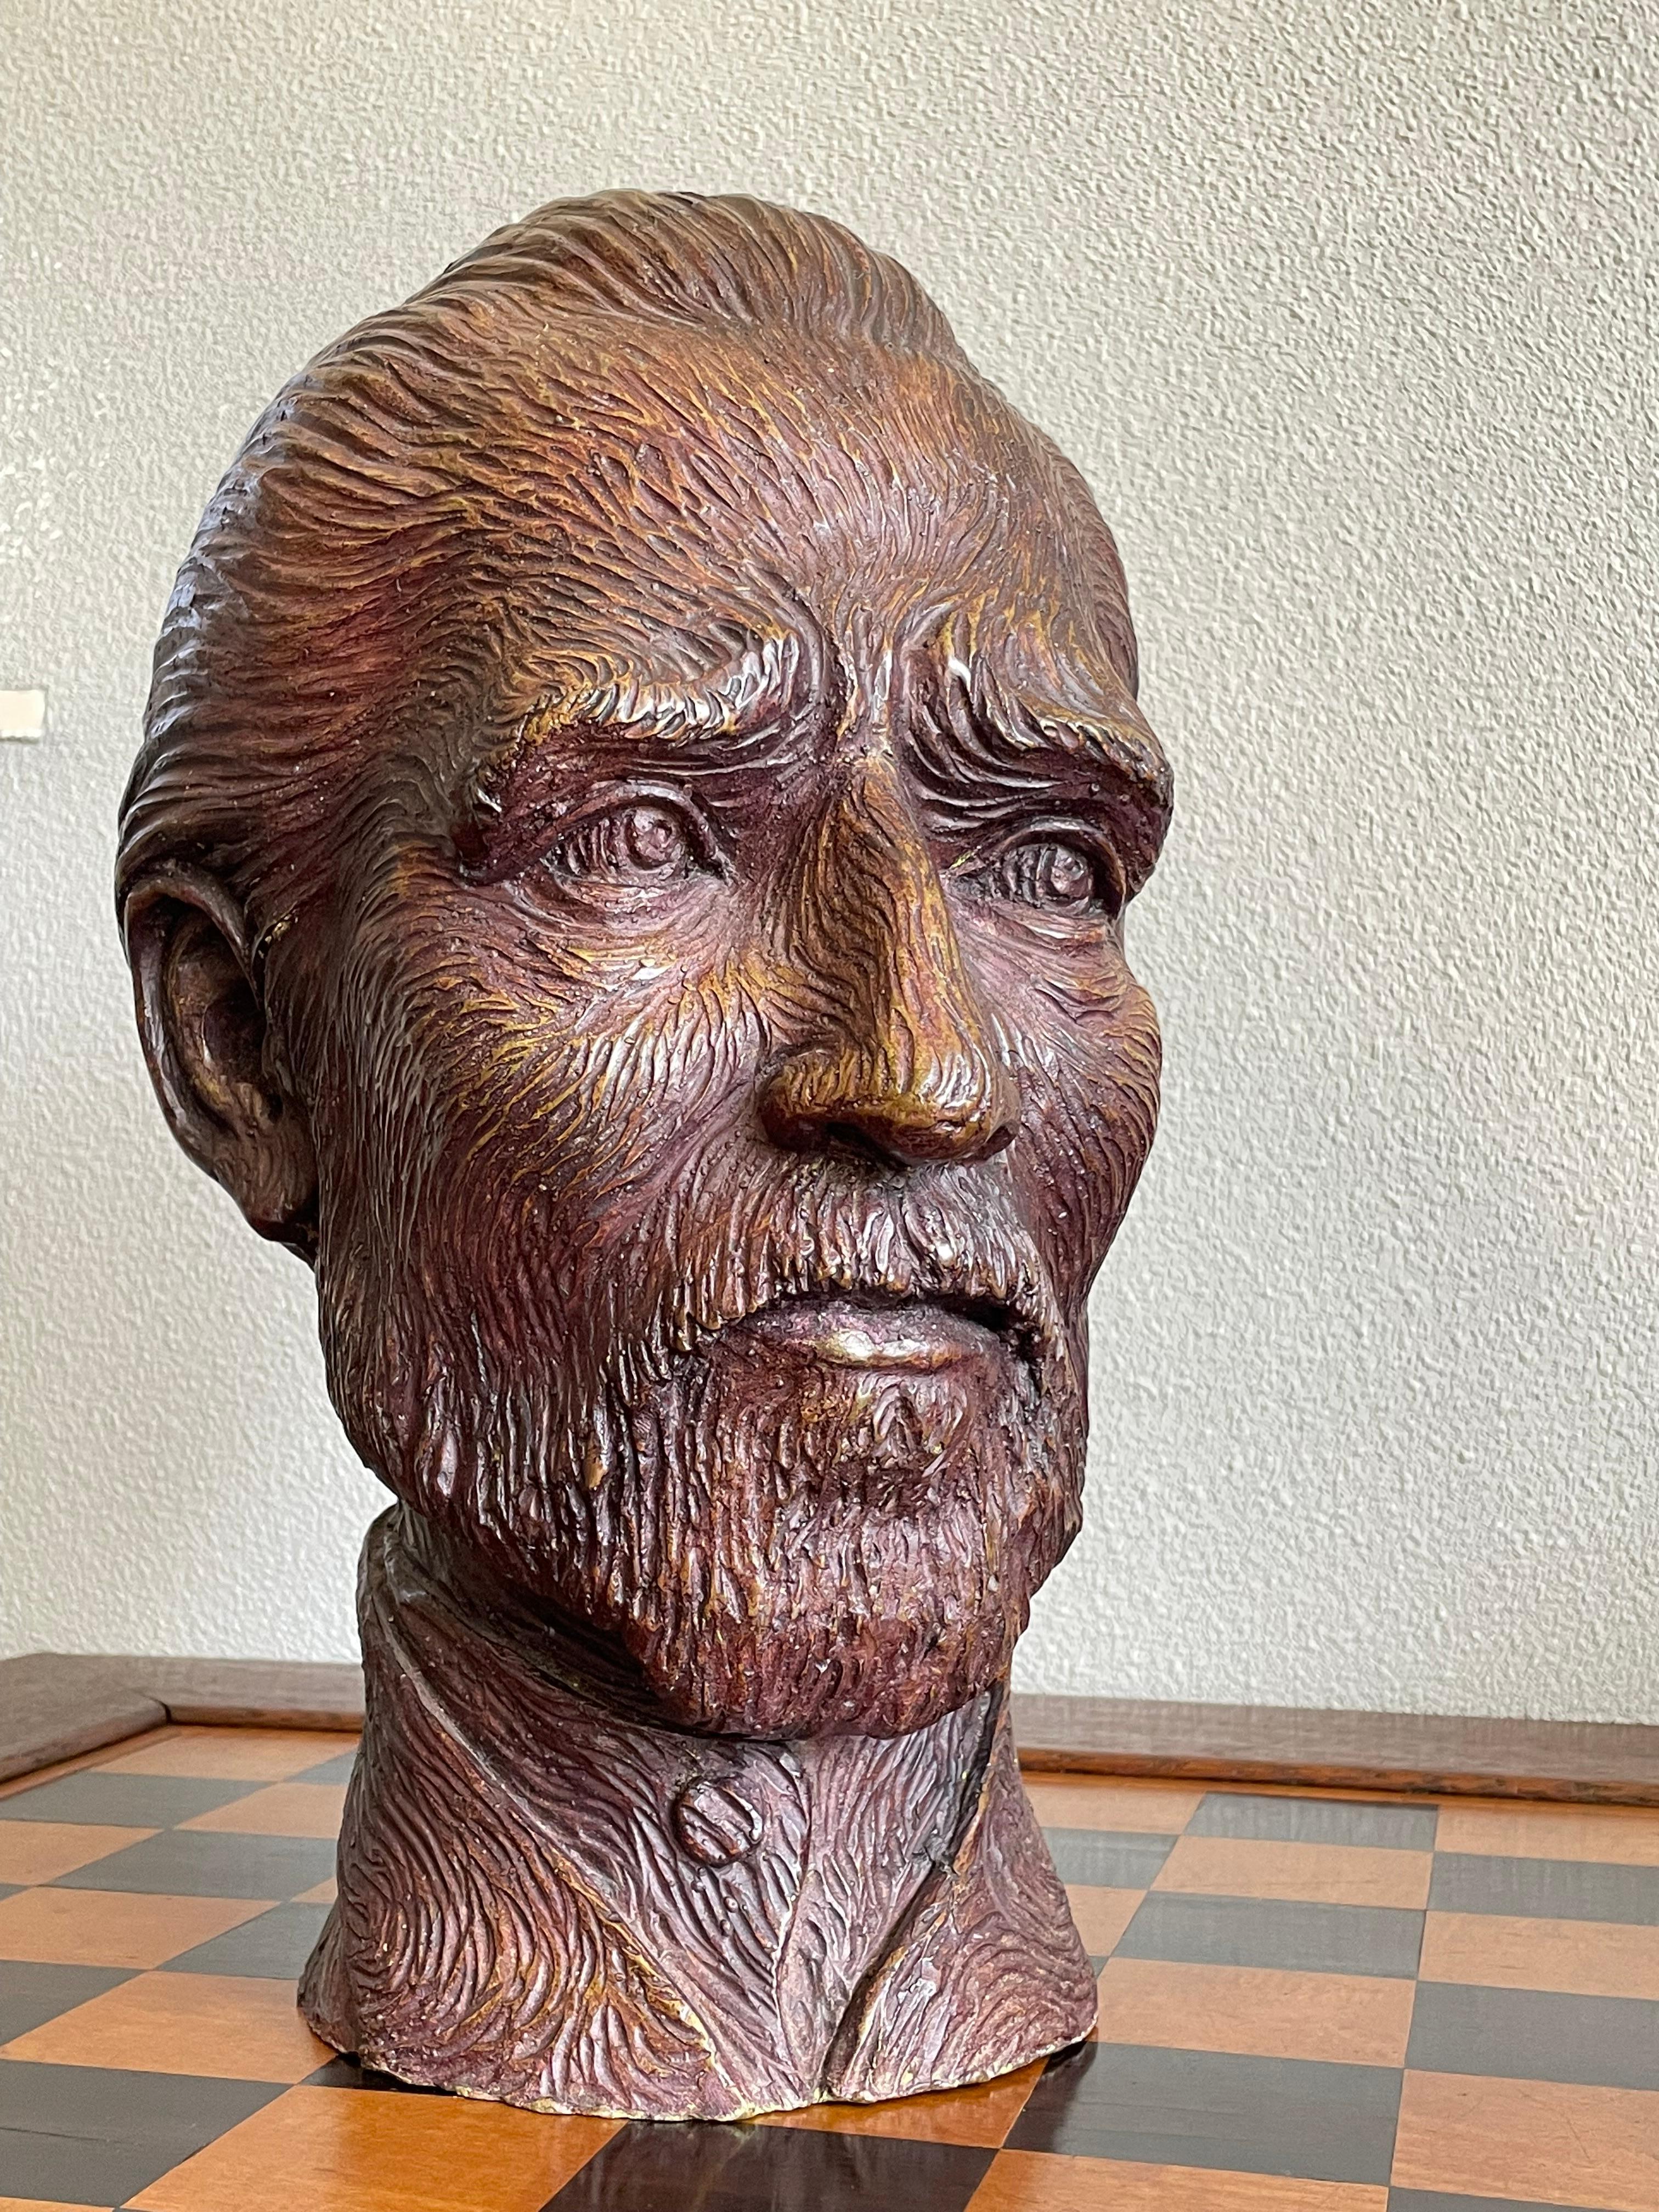 Stunning and very rare (if not unique) bronze bust of one of Holland's finest painters ever.

This life-size bronze head or bust sculpture of no other than Vincent van Gogh is special for several reasons and we are confident it will soon be